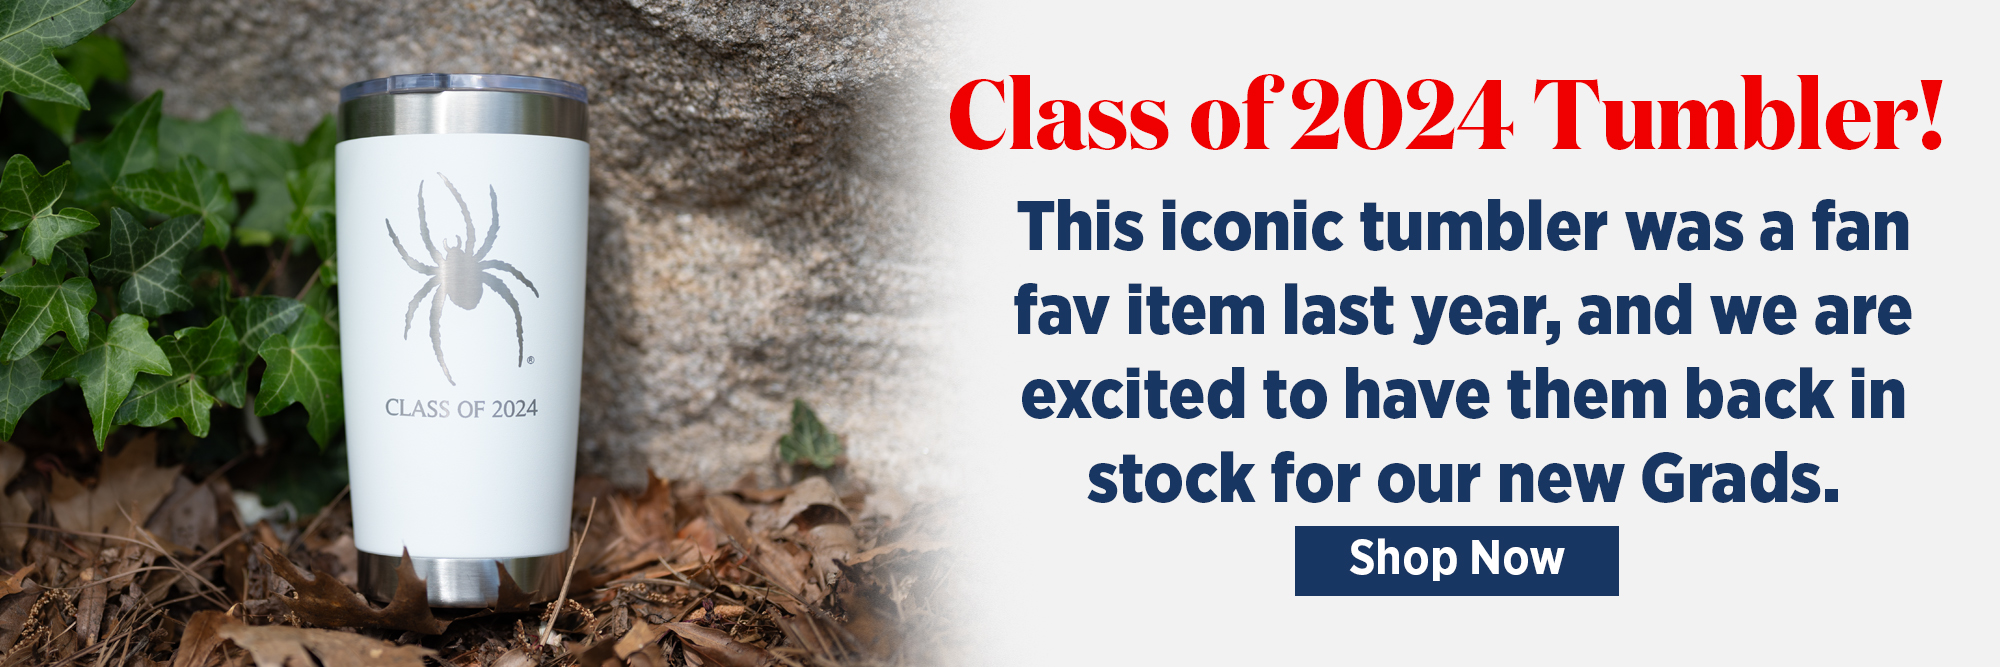 This iconic tumbler was a fan favorite item last year, and we are excited to have them back in stock for all our dedicated and new Grads.